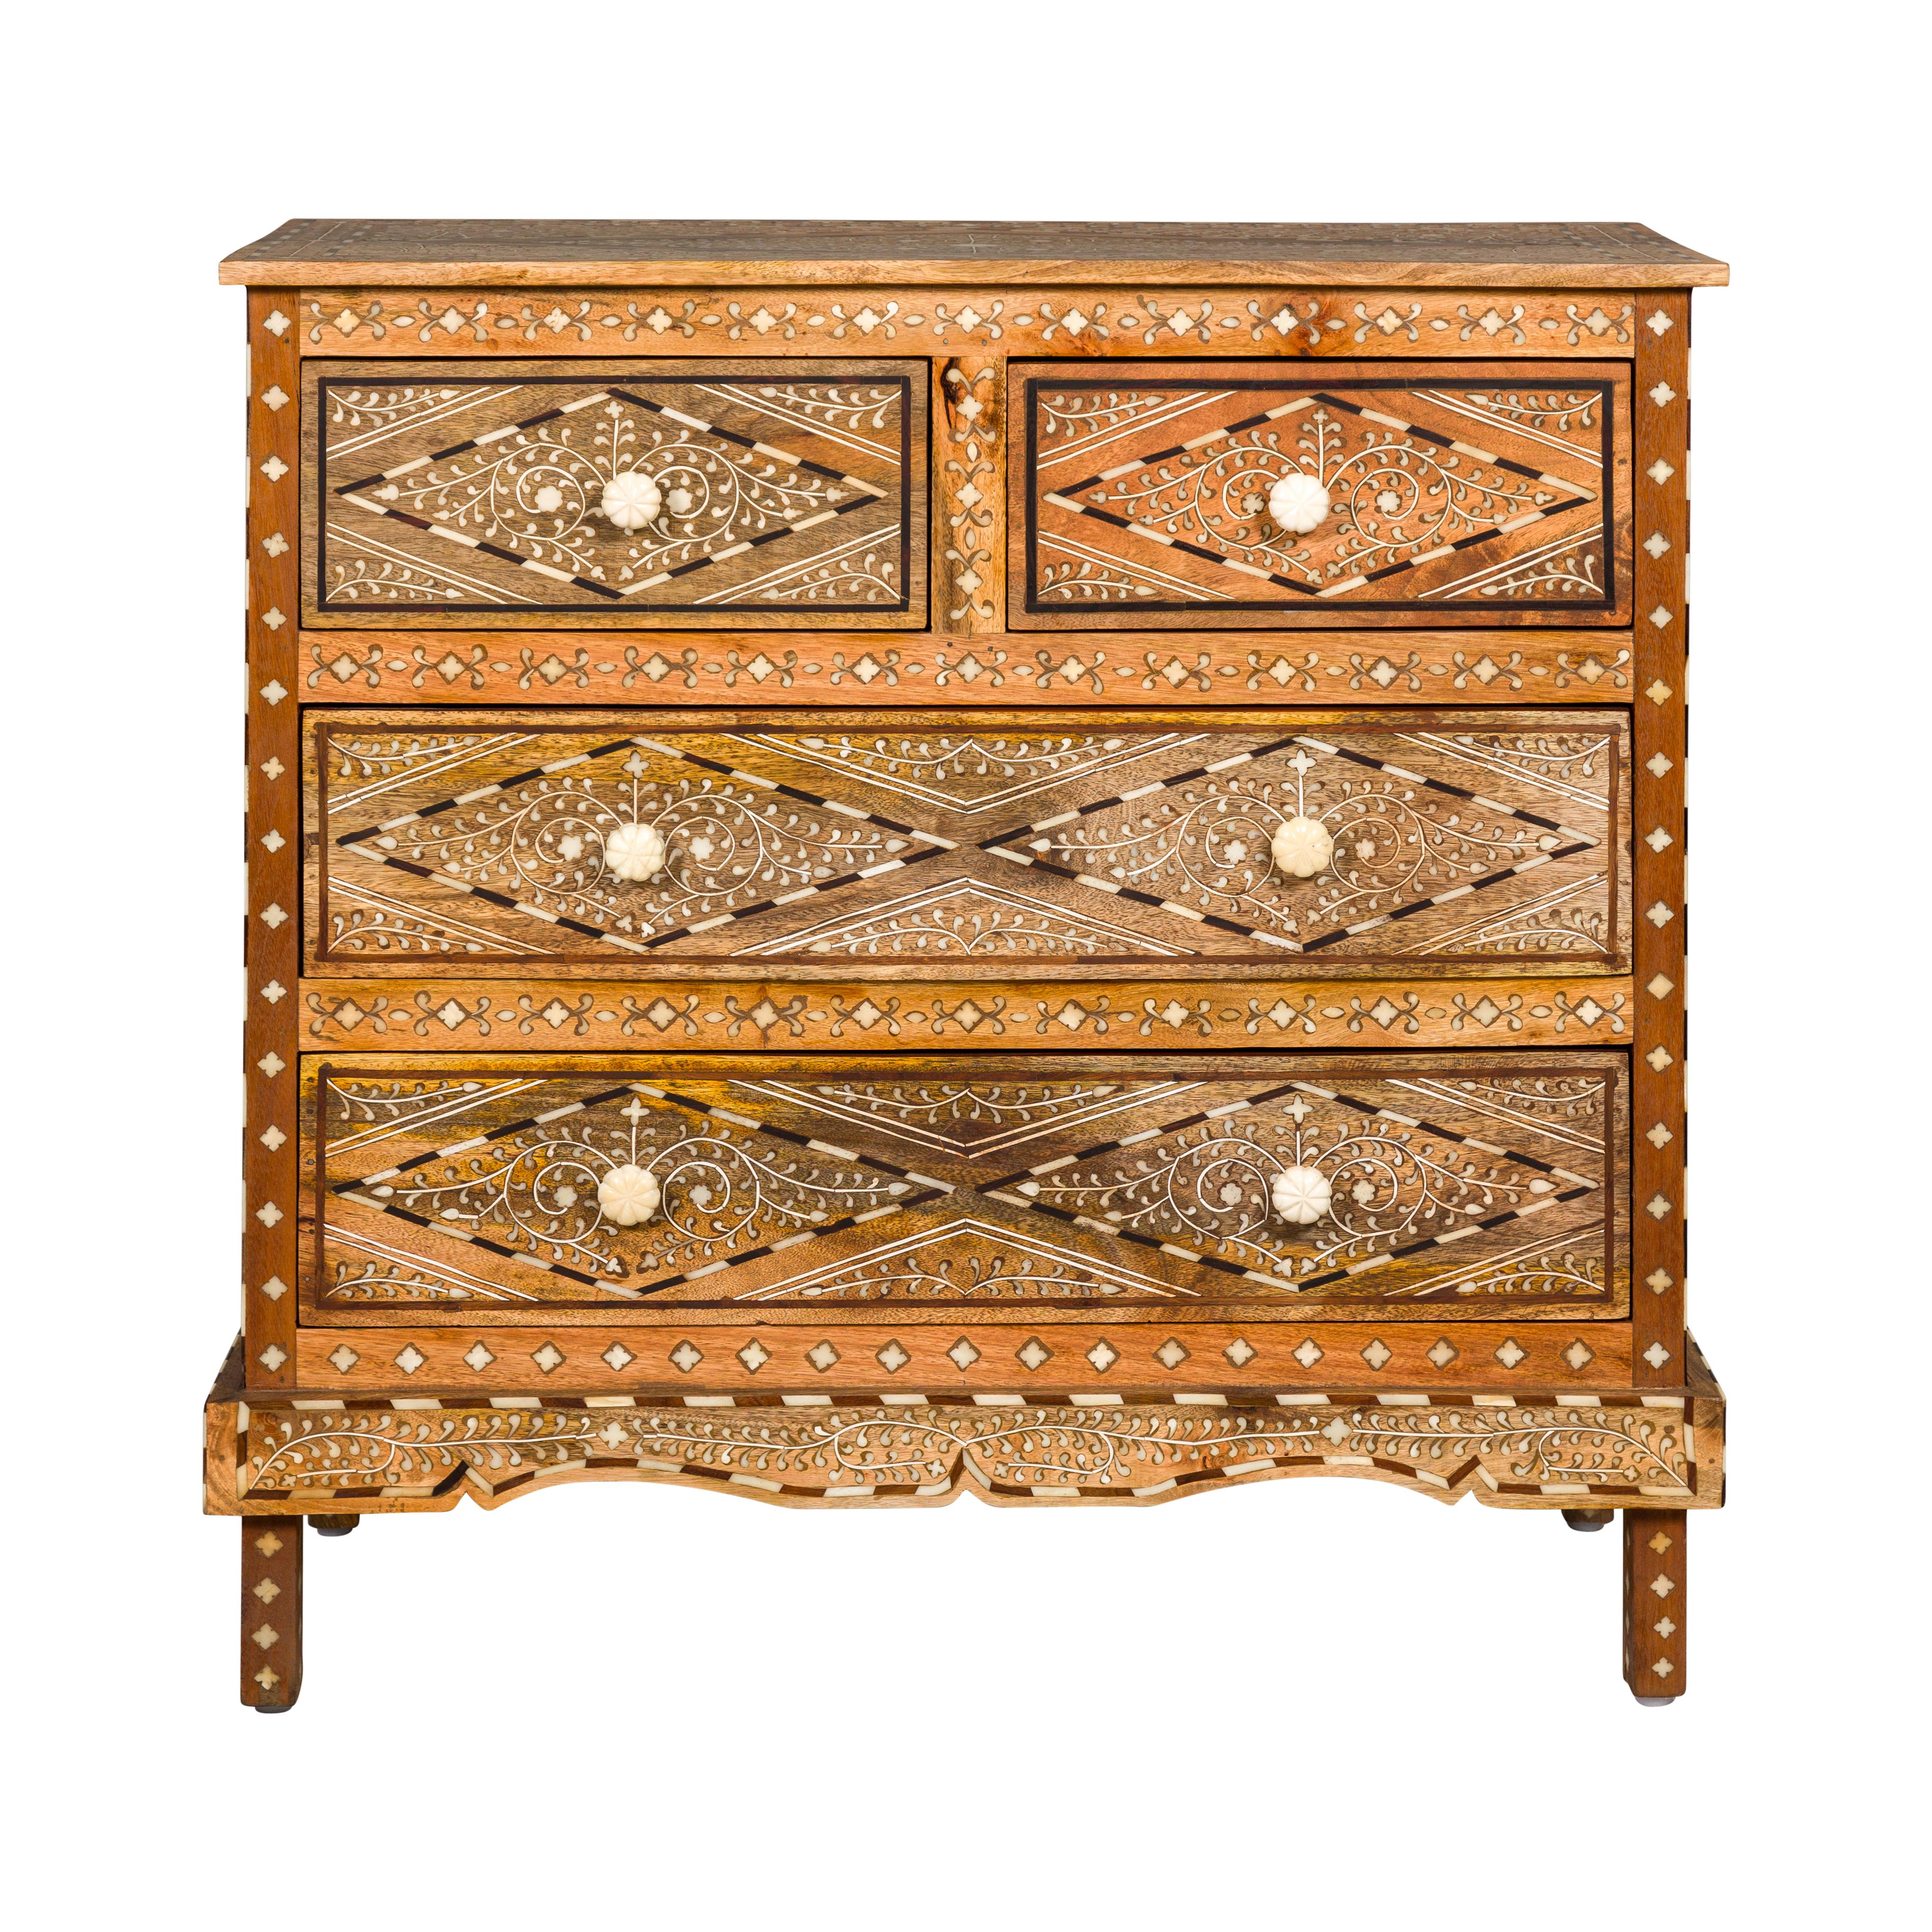 Anglo-Indian Style Mango Wood Four-Drawer Chest with Foliage Themed Bone Inlay For Sale 14